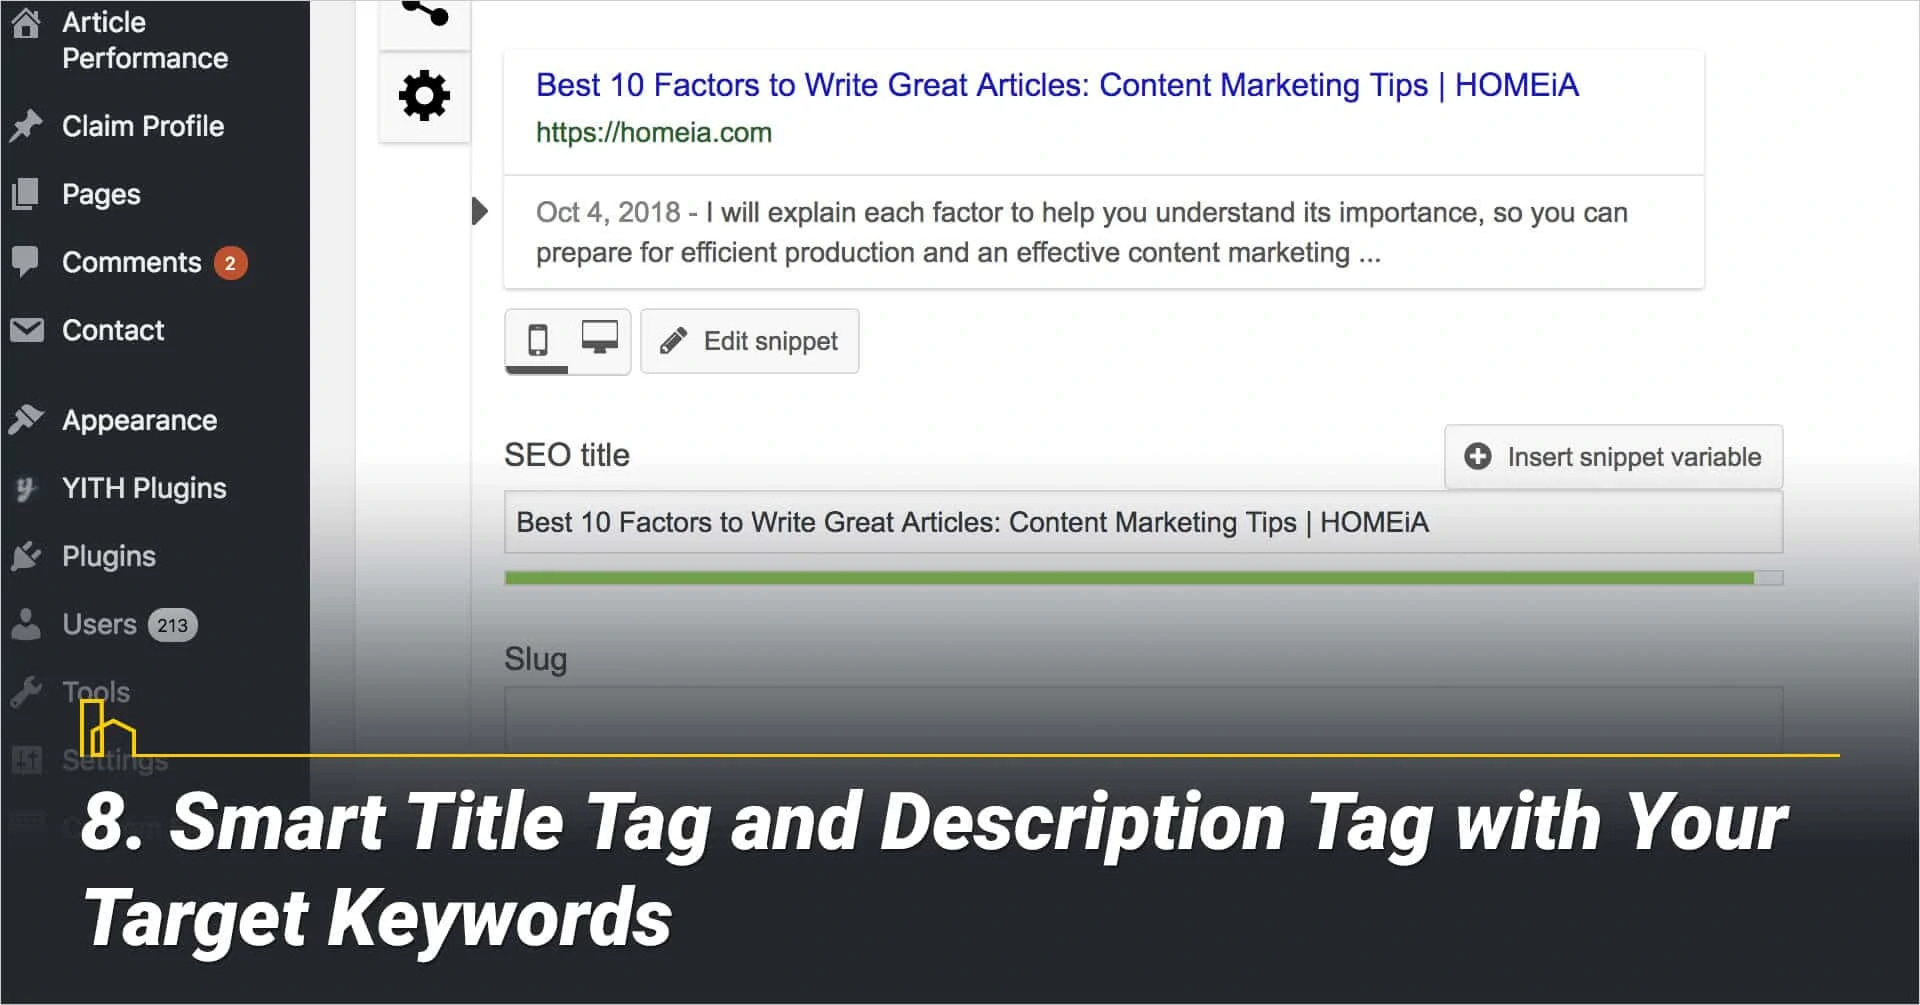 Smart Title Tag and Description Tag with Your Target Keywords, make your articles searchable